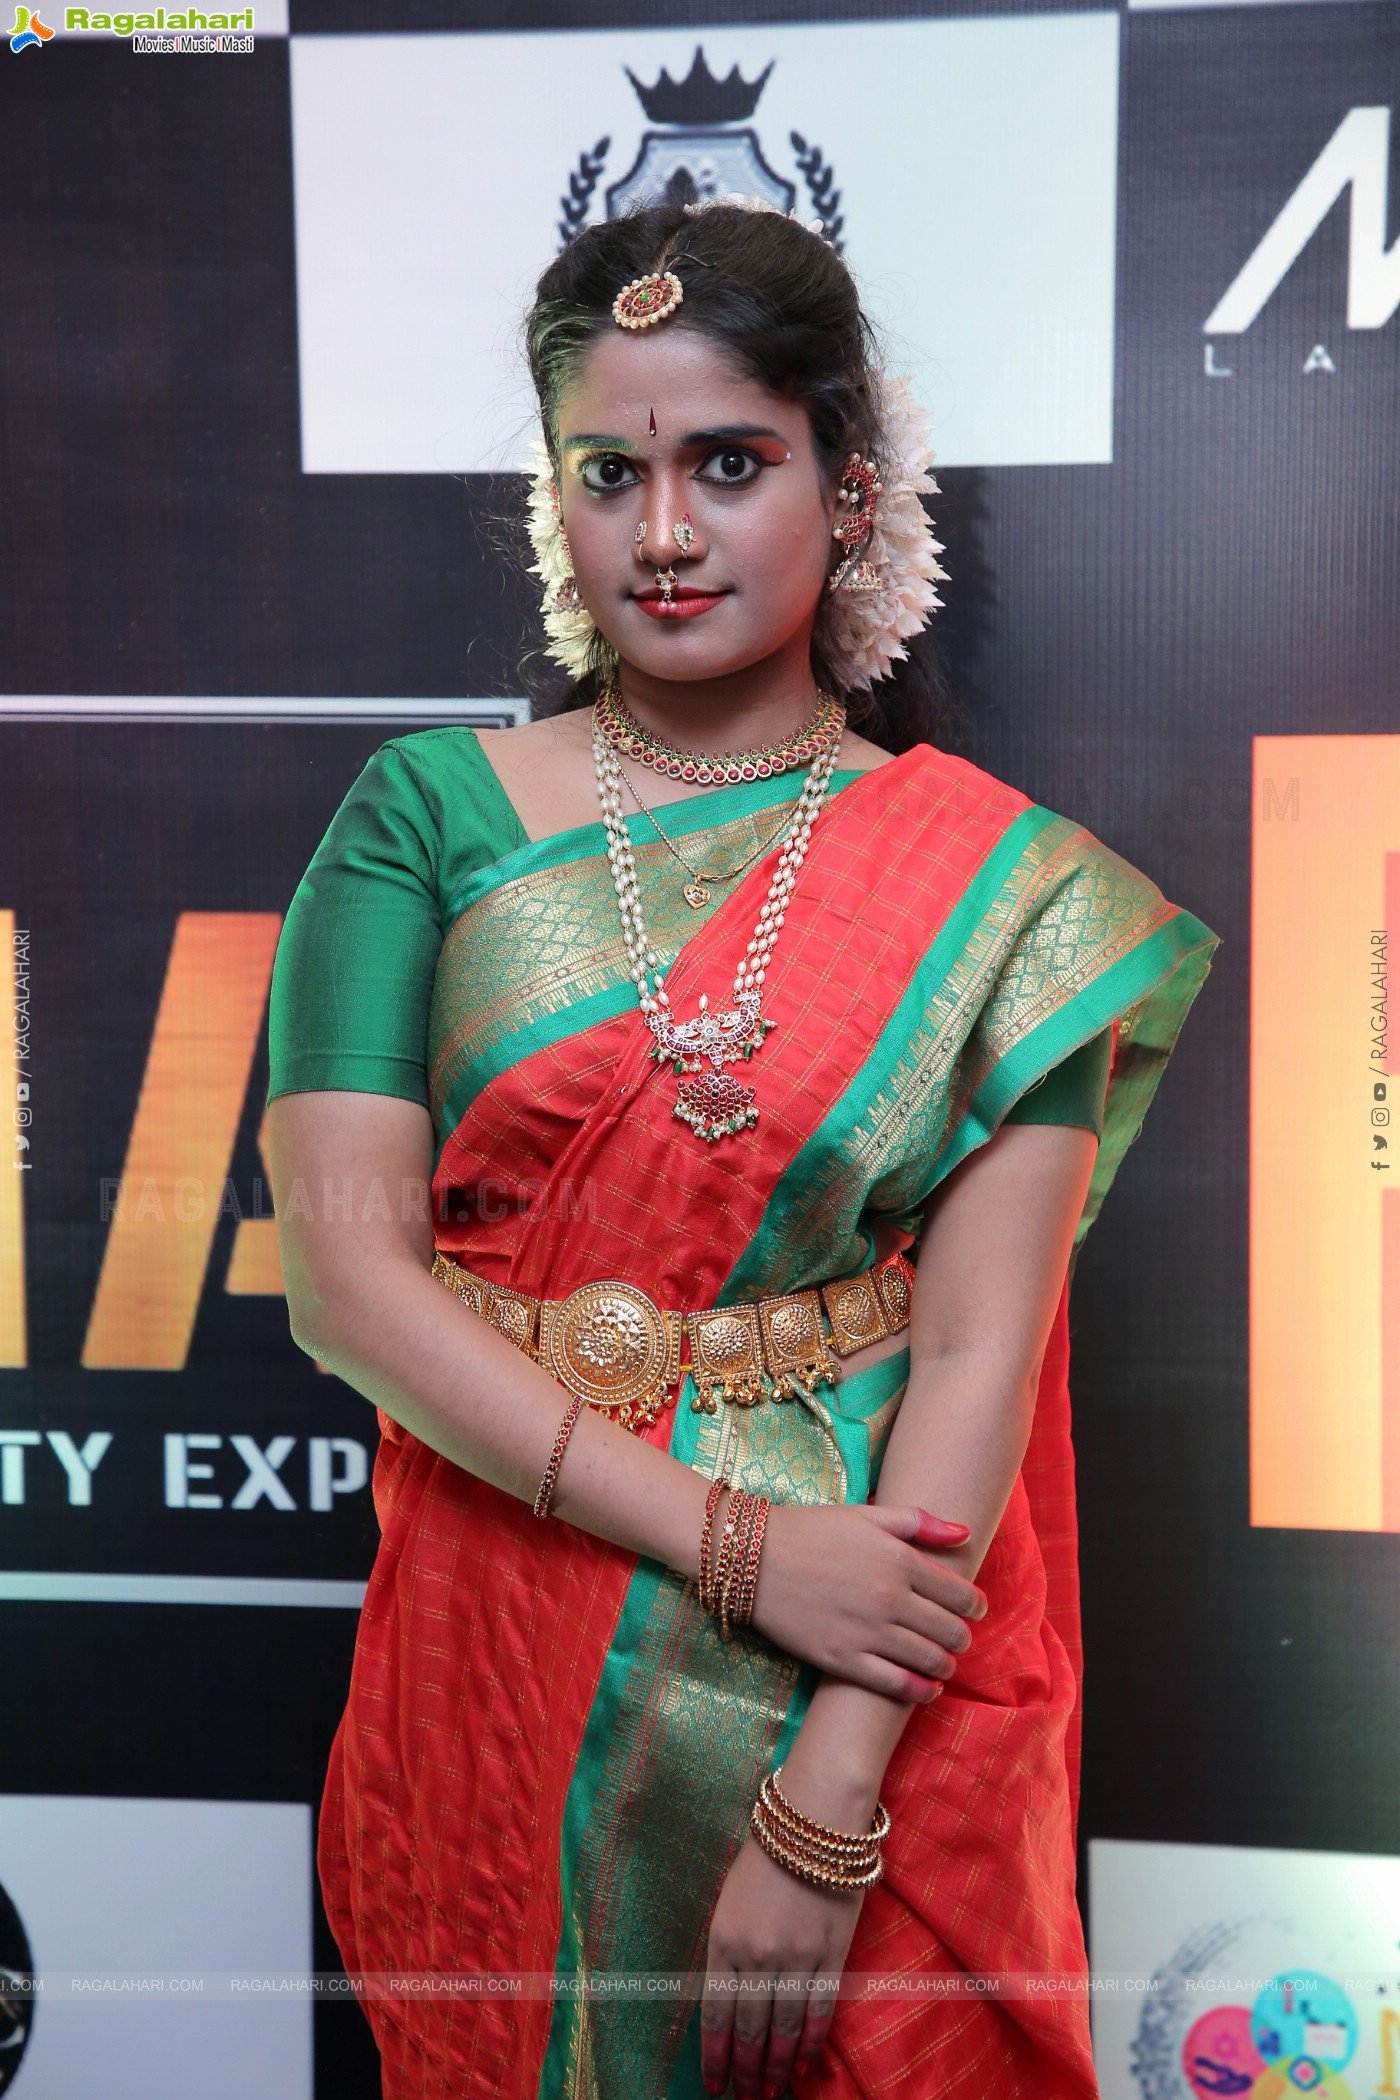 SBMS Bridal Makeup Competition Season-4 Poster Launch Event at The Park, Hyderabad